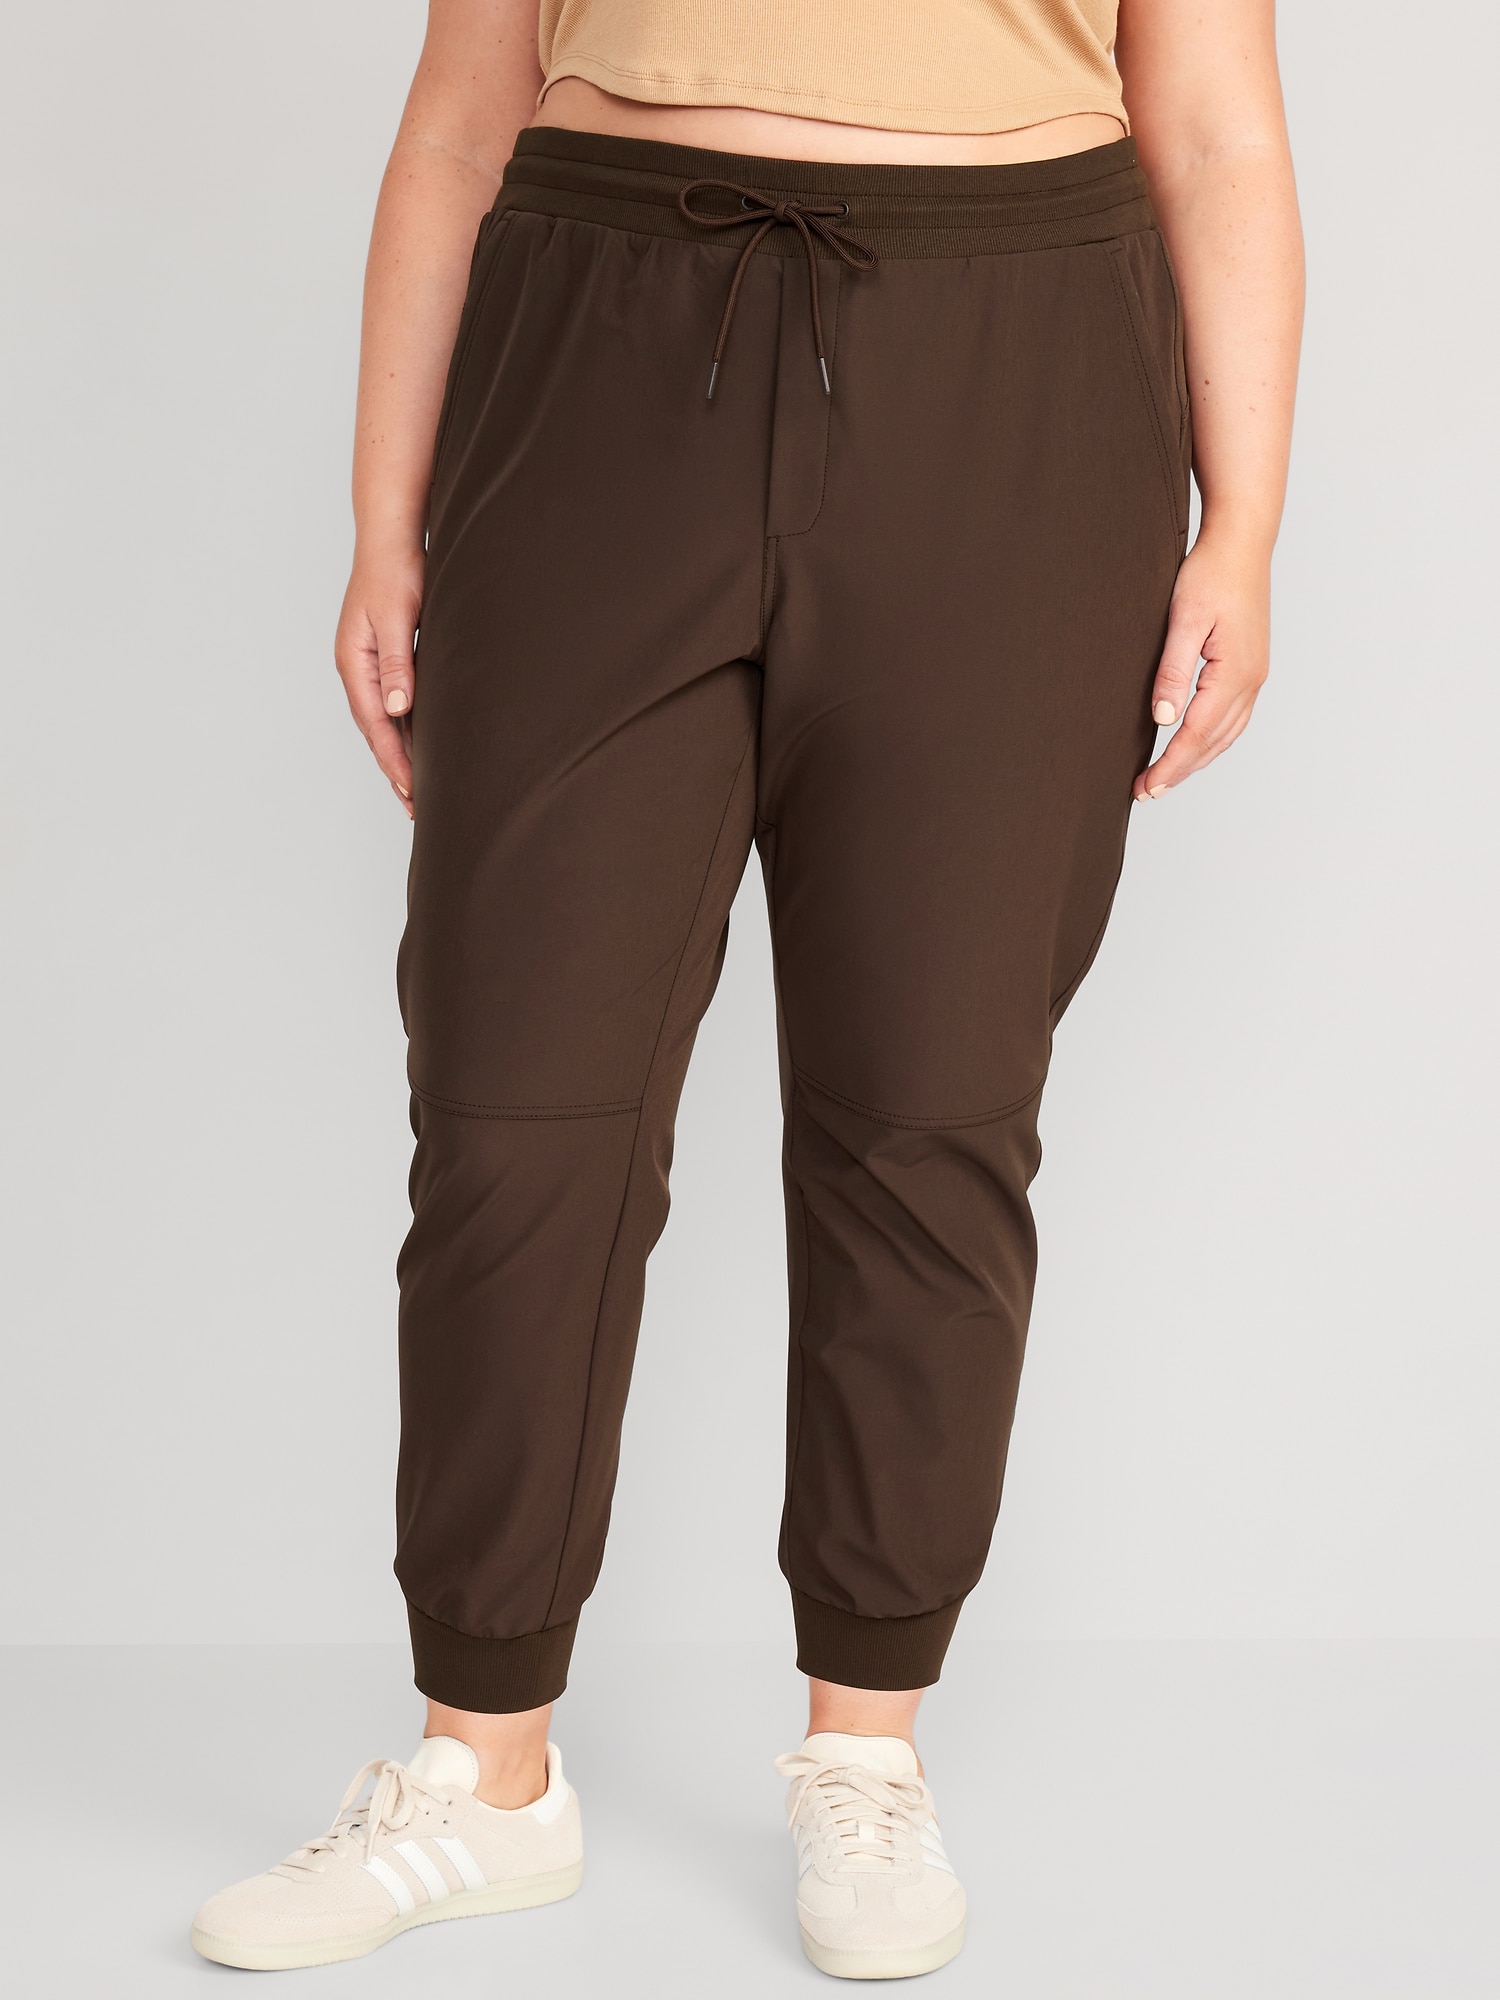 Extra High-Waisted StretchTech Cargo Jogger Pants for Women, Old Navy